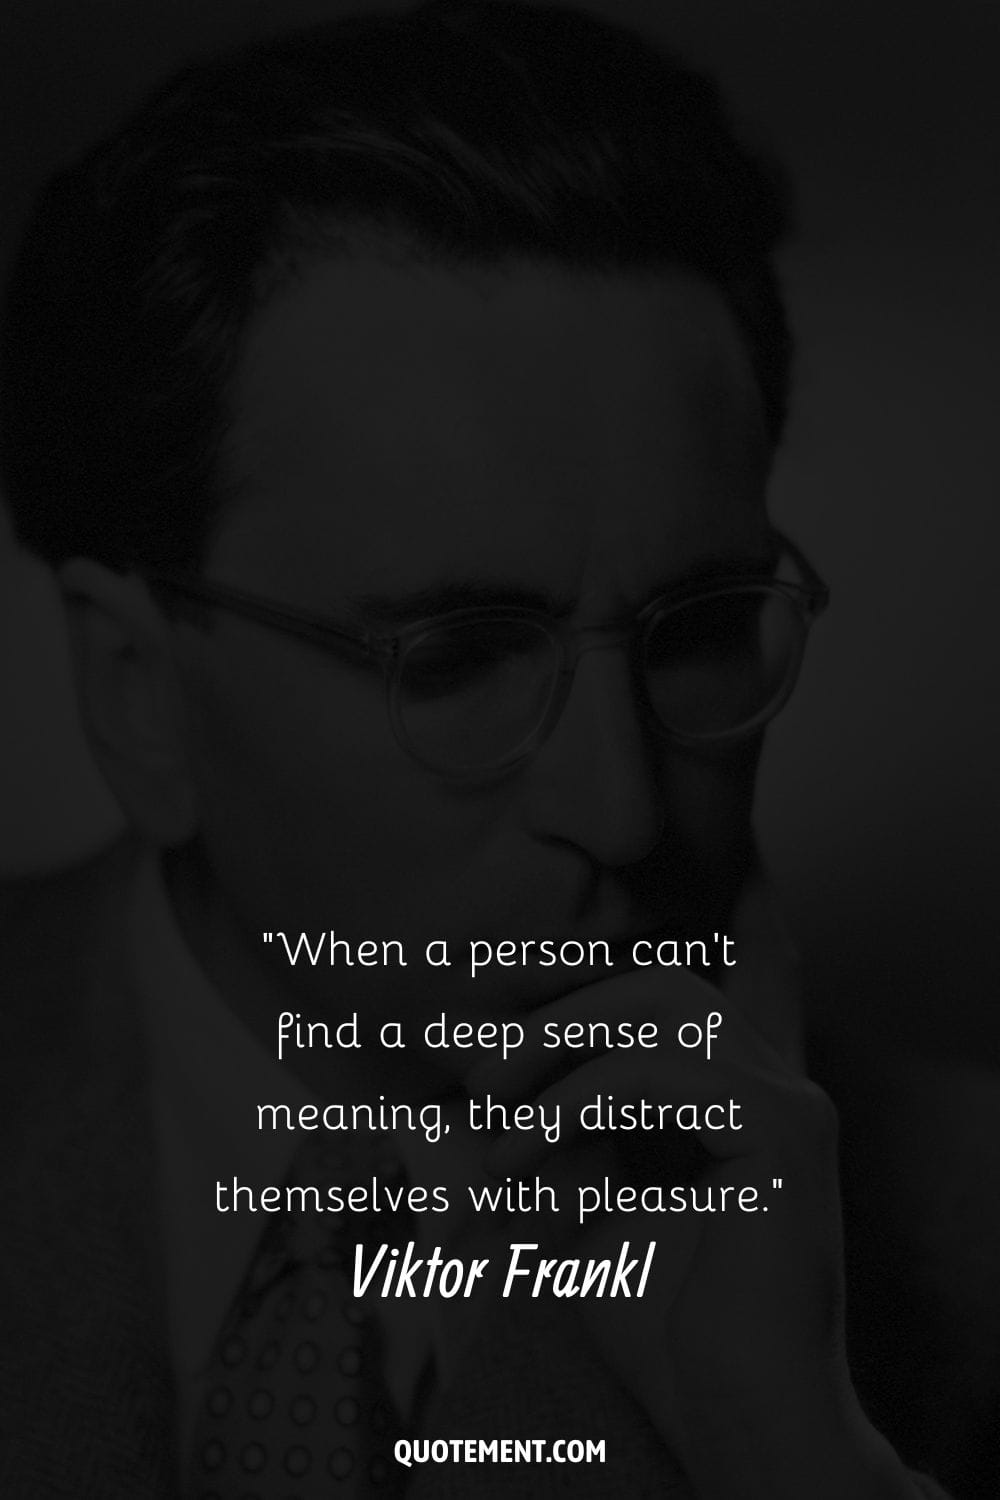 Monochrome image of Viktor Frankl representing his quote on meaning and pleasure.